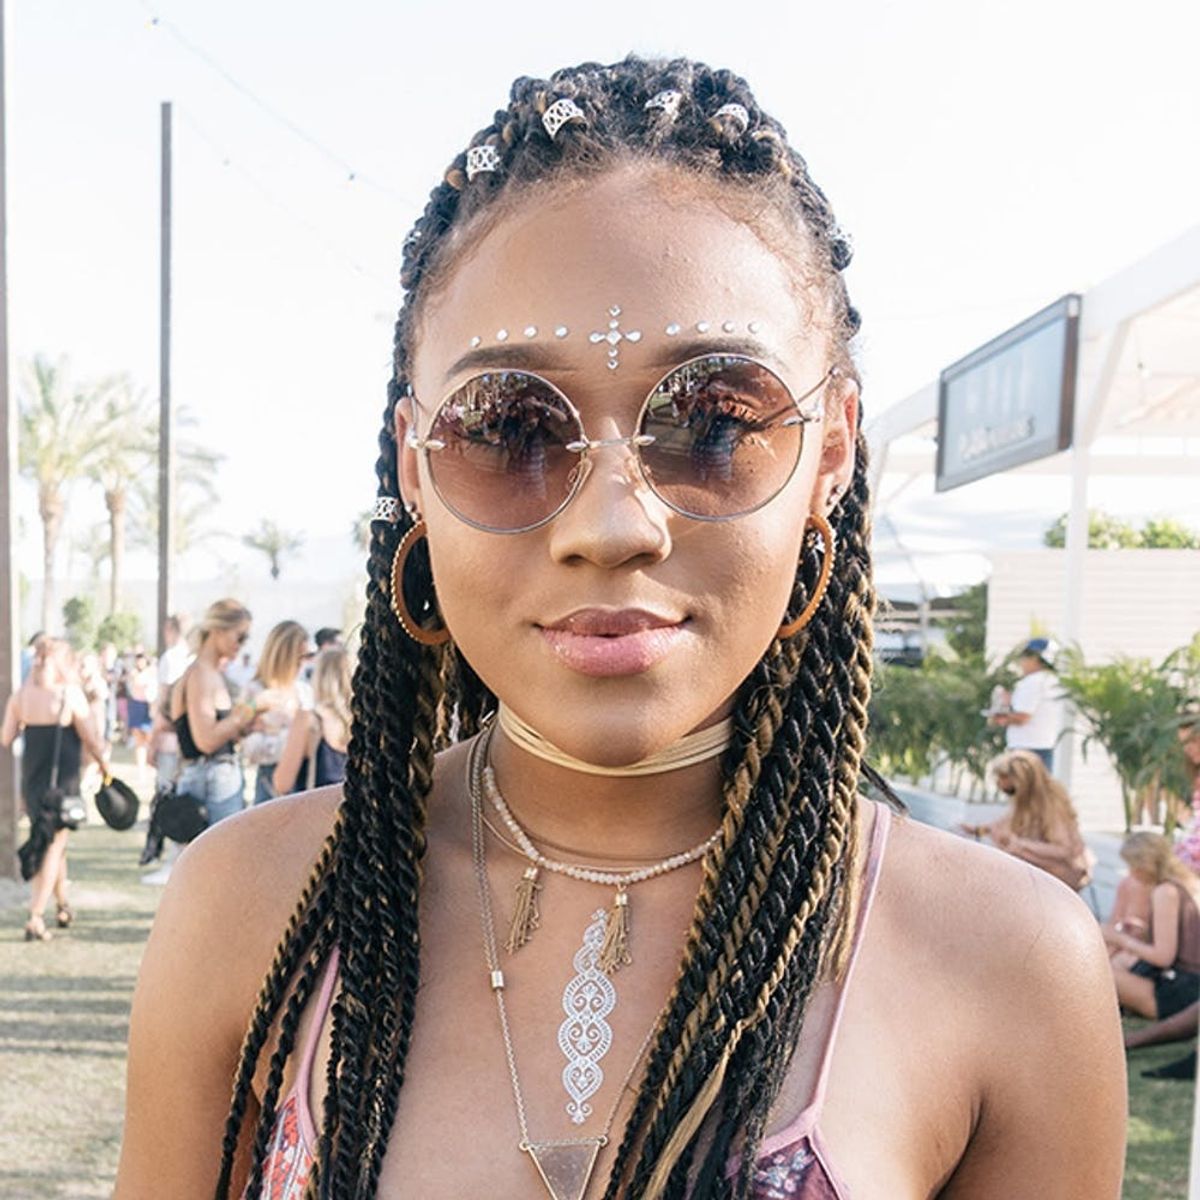 These Are the Only Two Beauty Looks You Need for a Music Festival